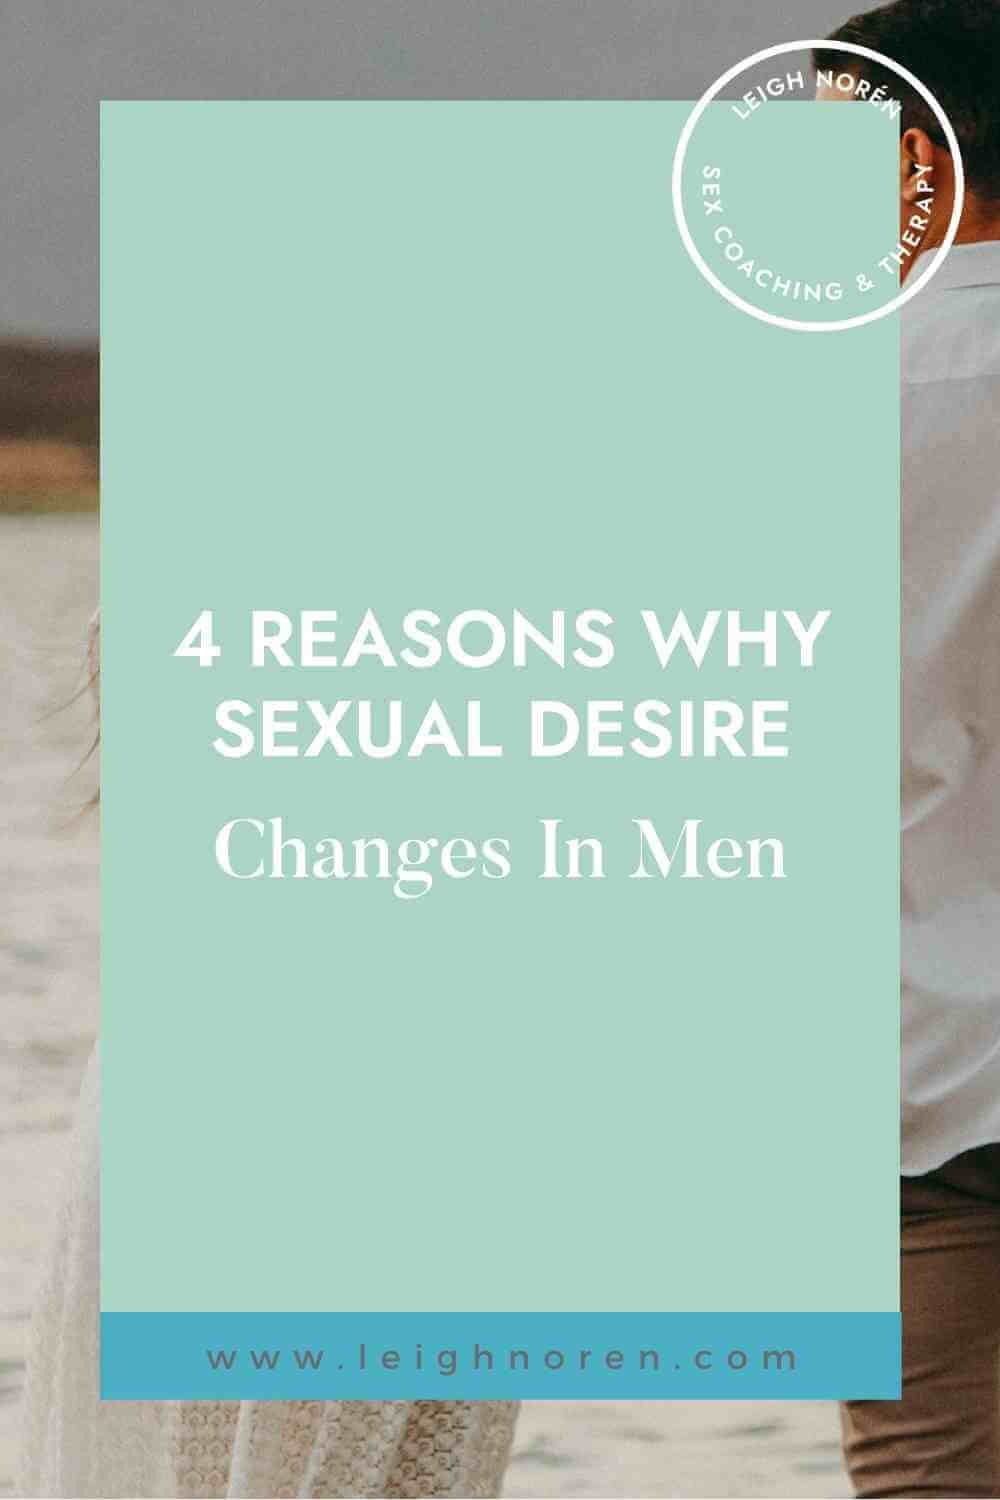 4 Reasons Why Sexual Desire Changes In Men